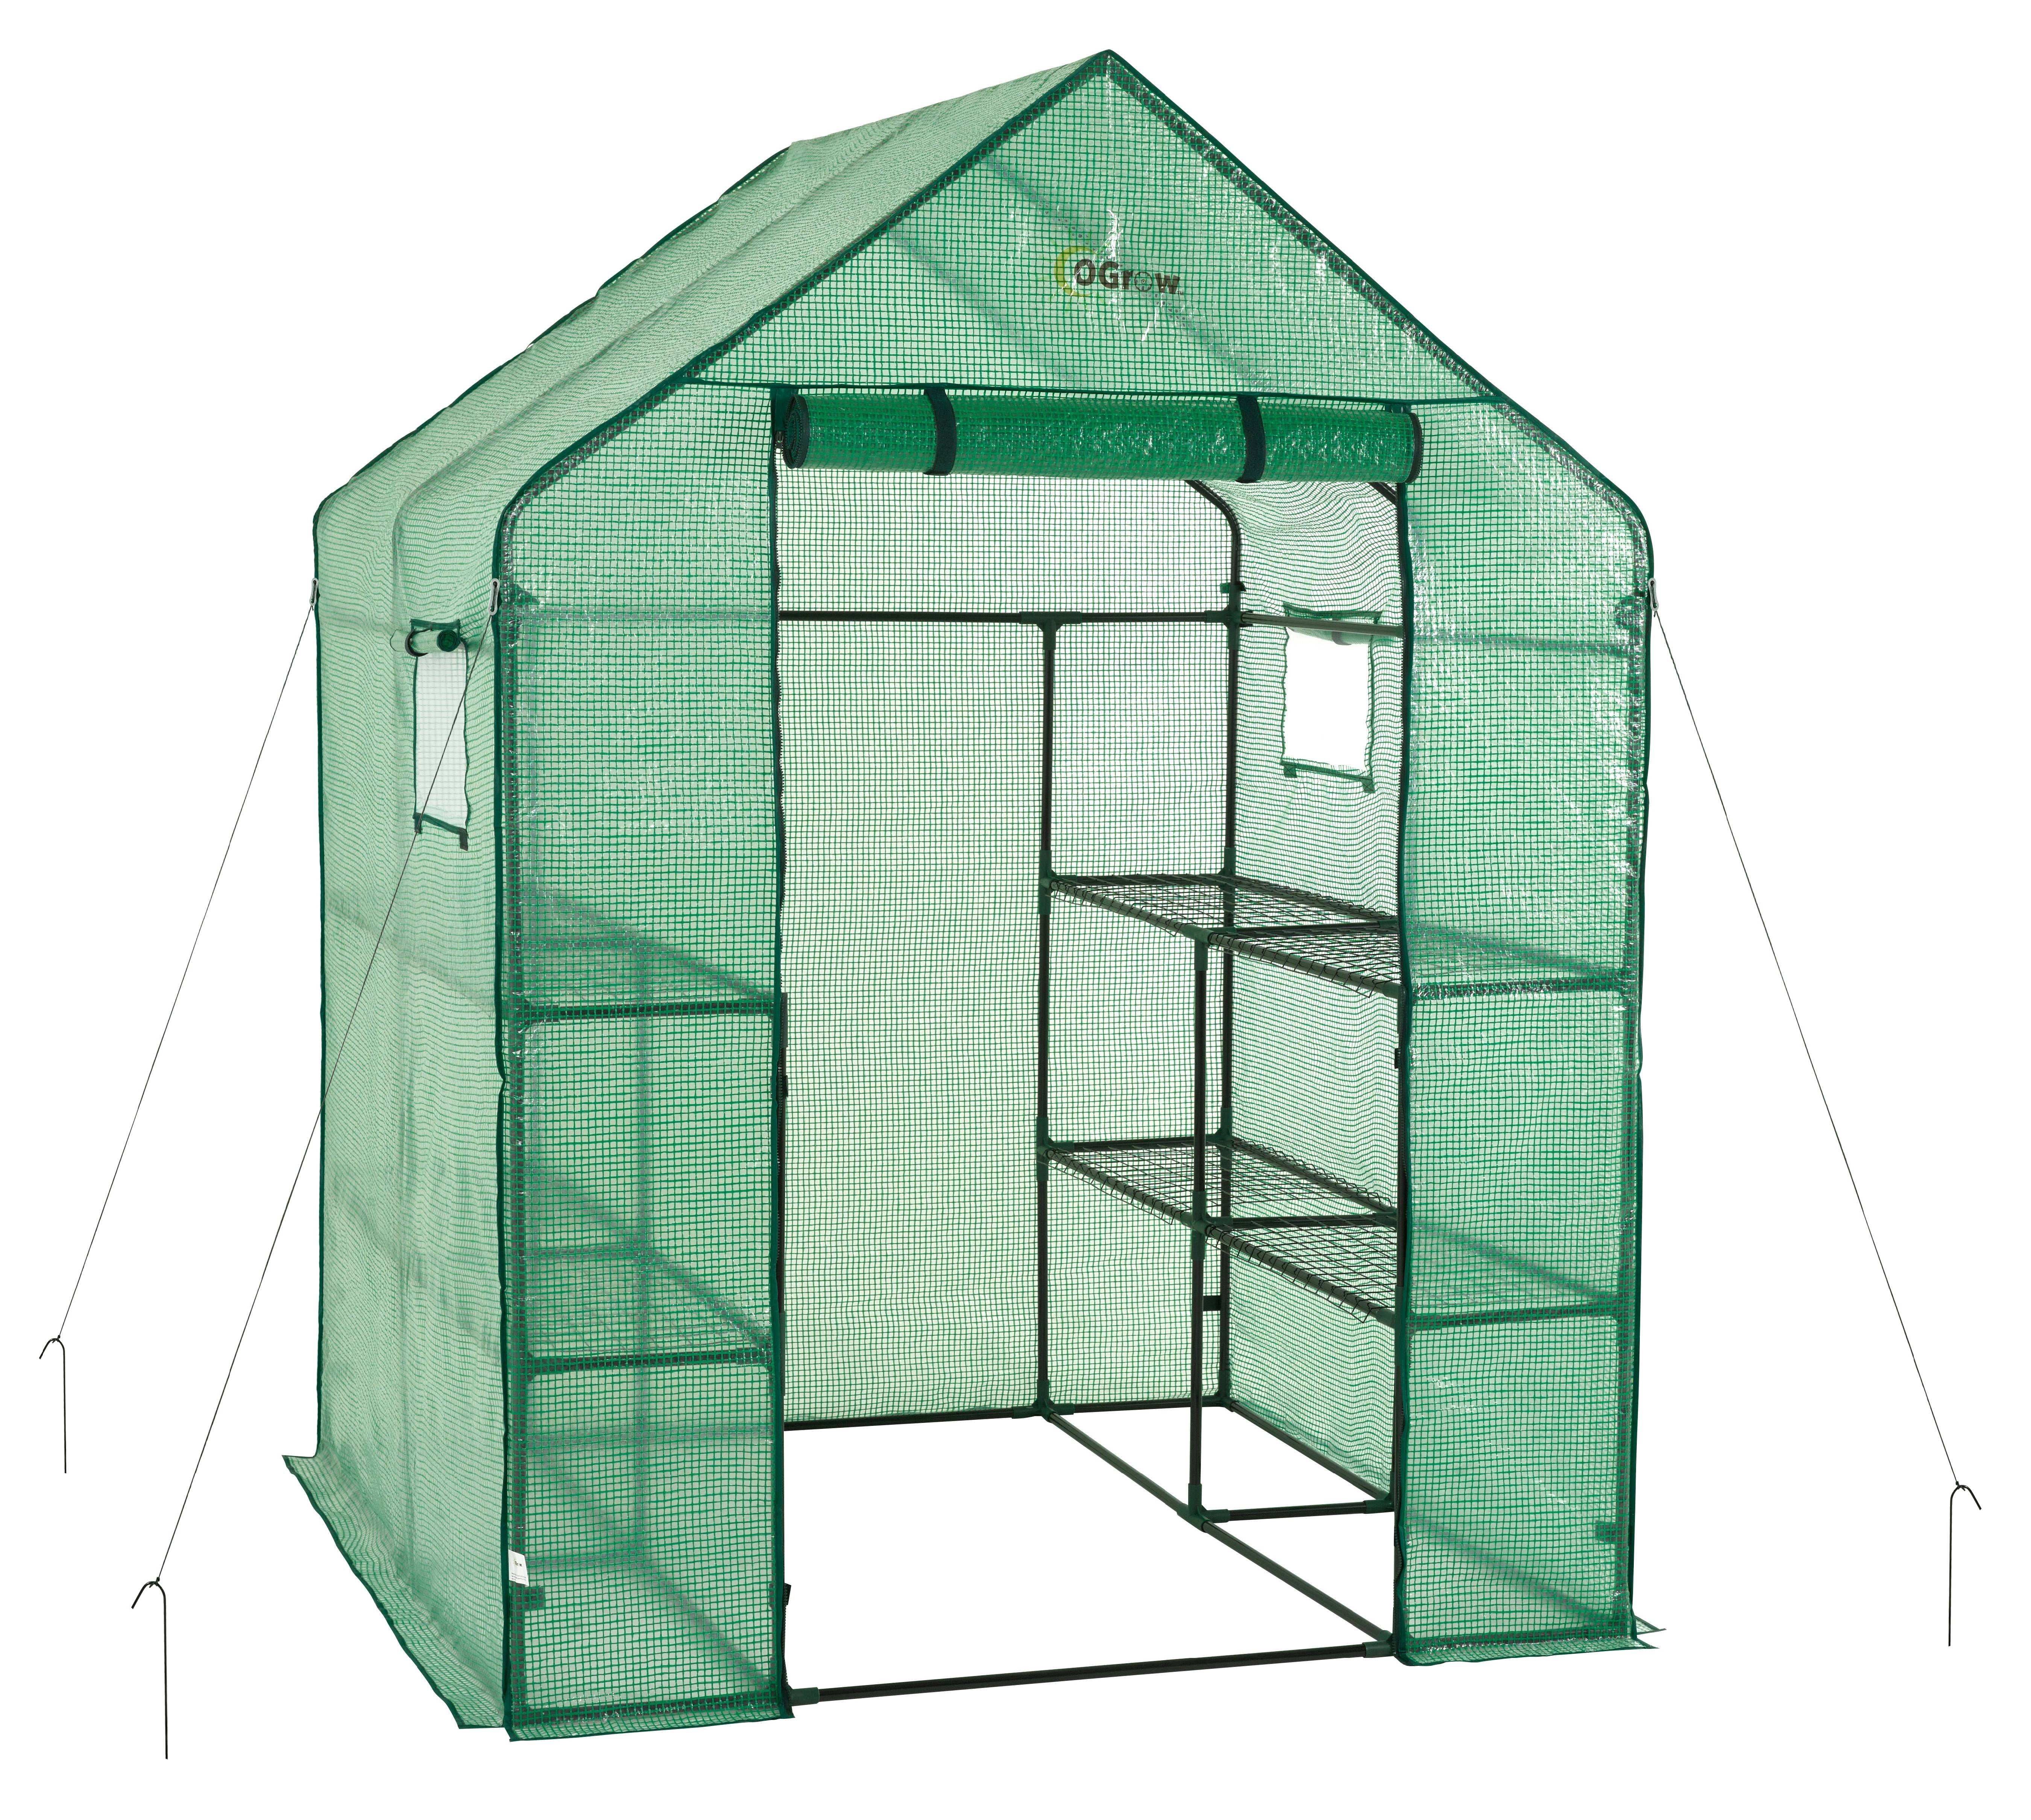 OGrow Mini Walk In Greenhouse for Outdoors Portable Green House 2 Tiers 8 Shelves 15lbs